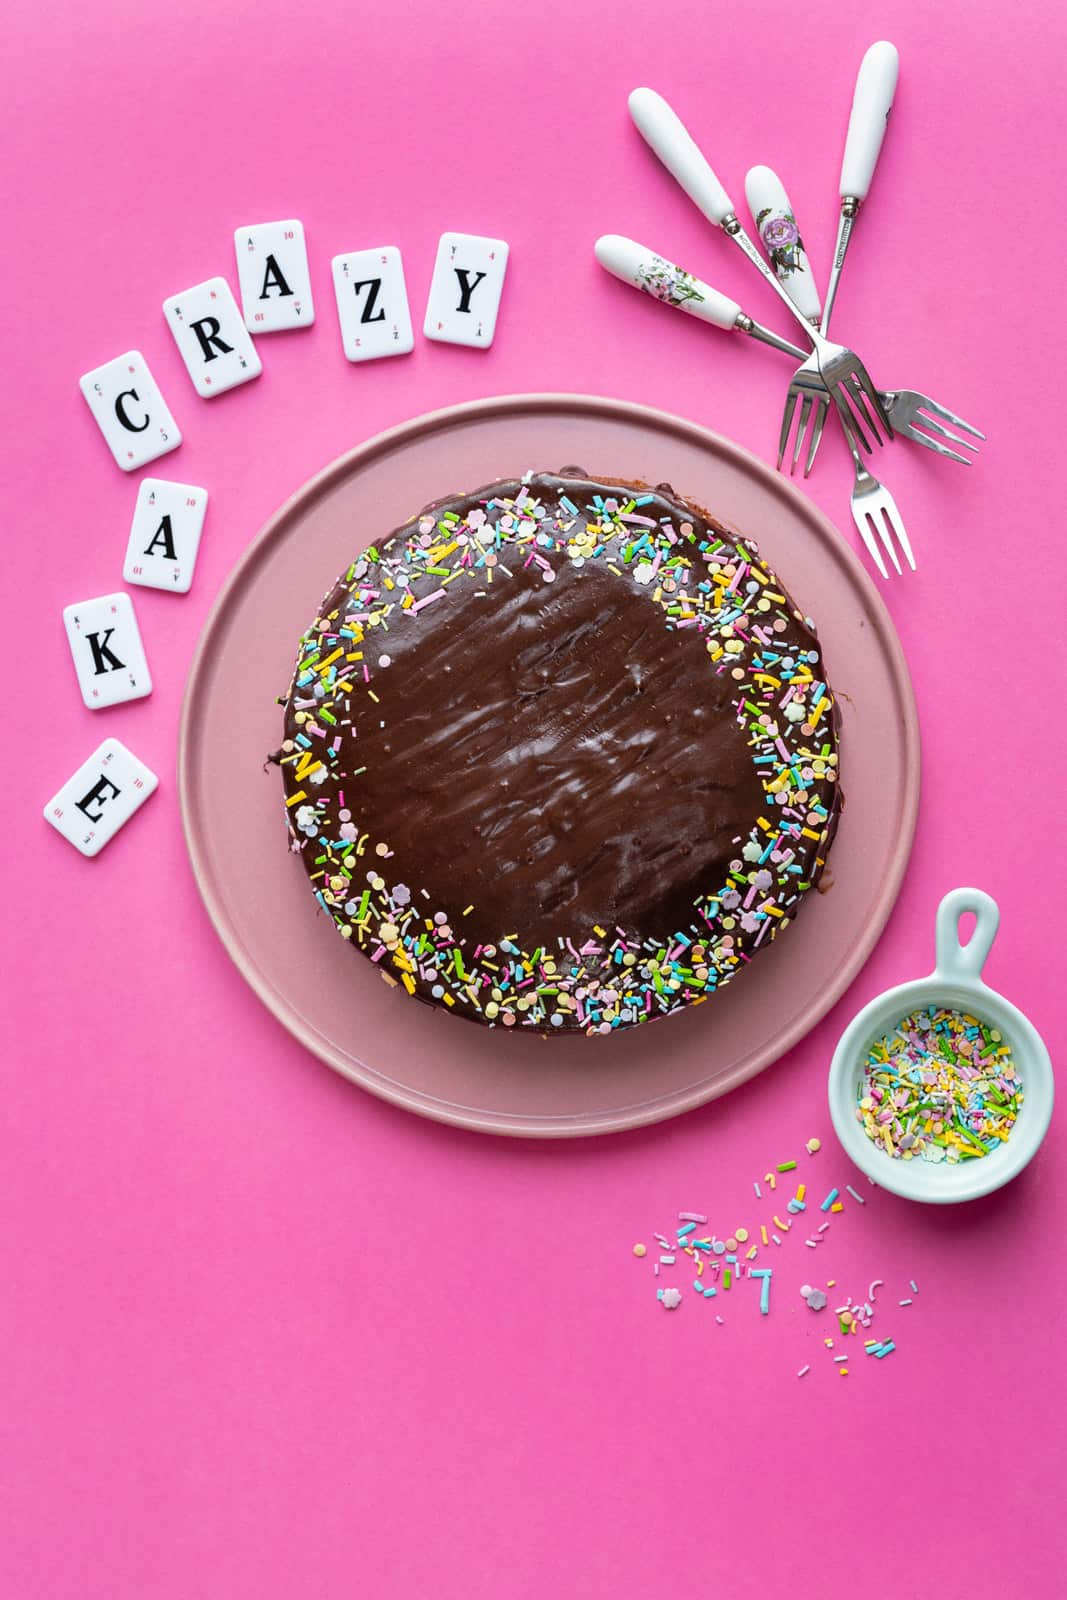 Chocolate crazy cake covered with chocolate glaze and decorated with colourful sprinkles